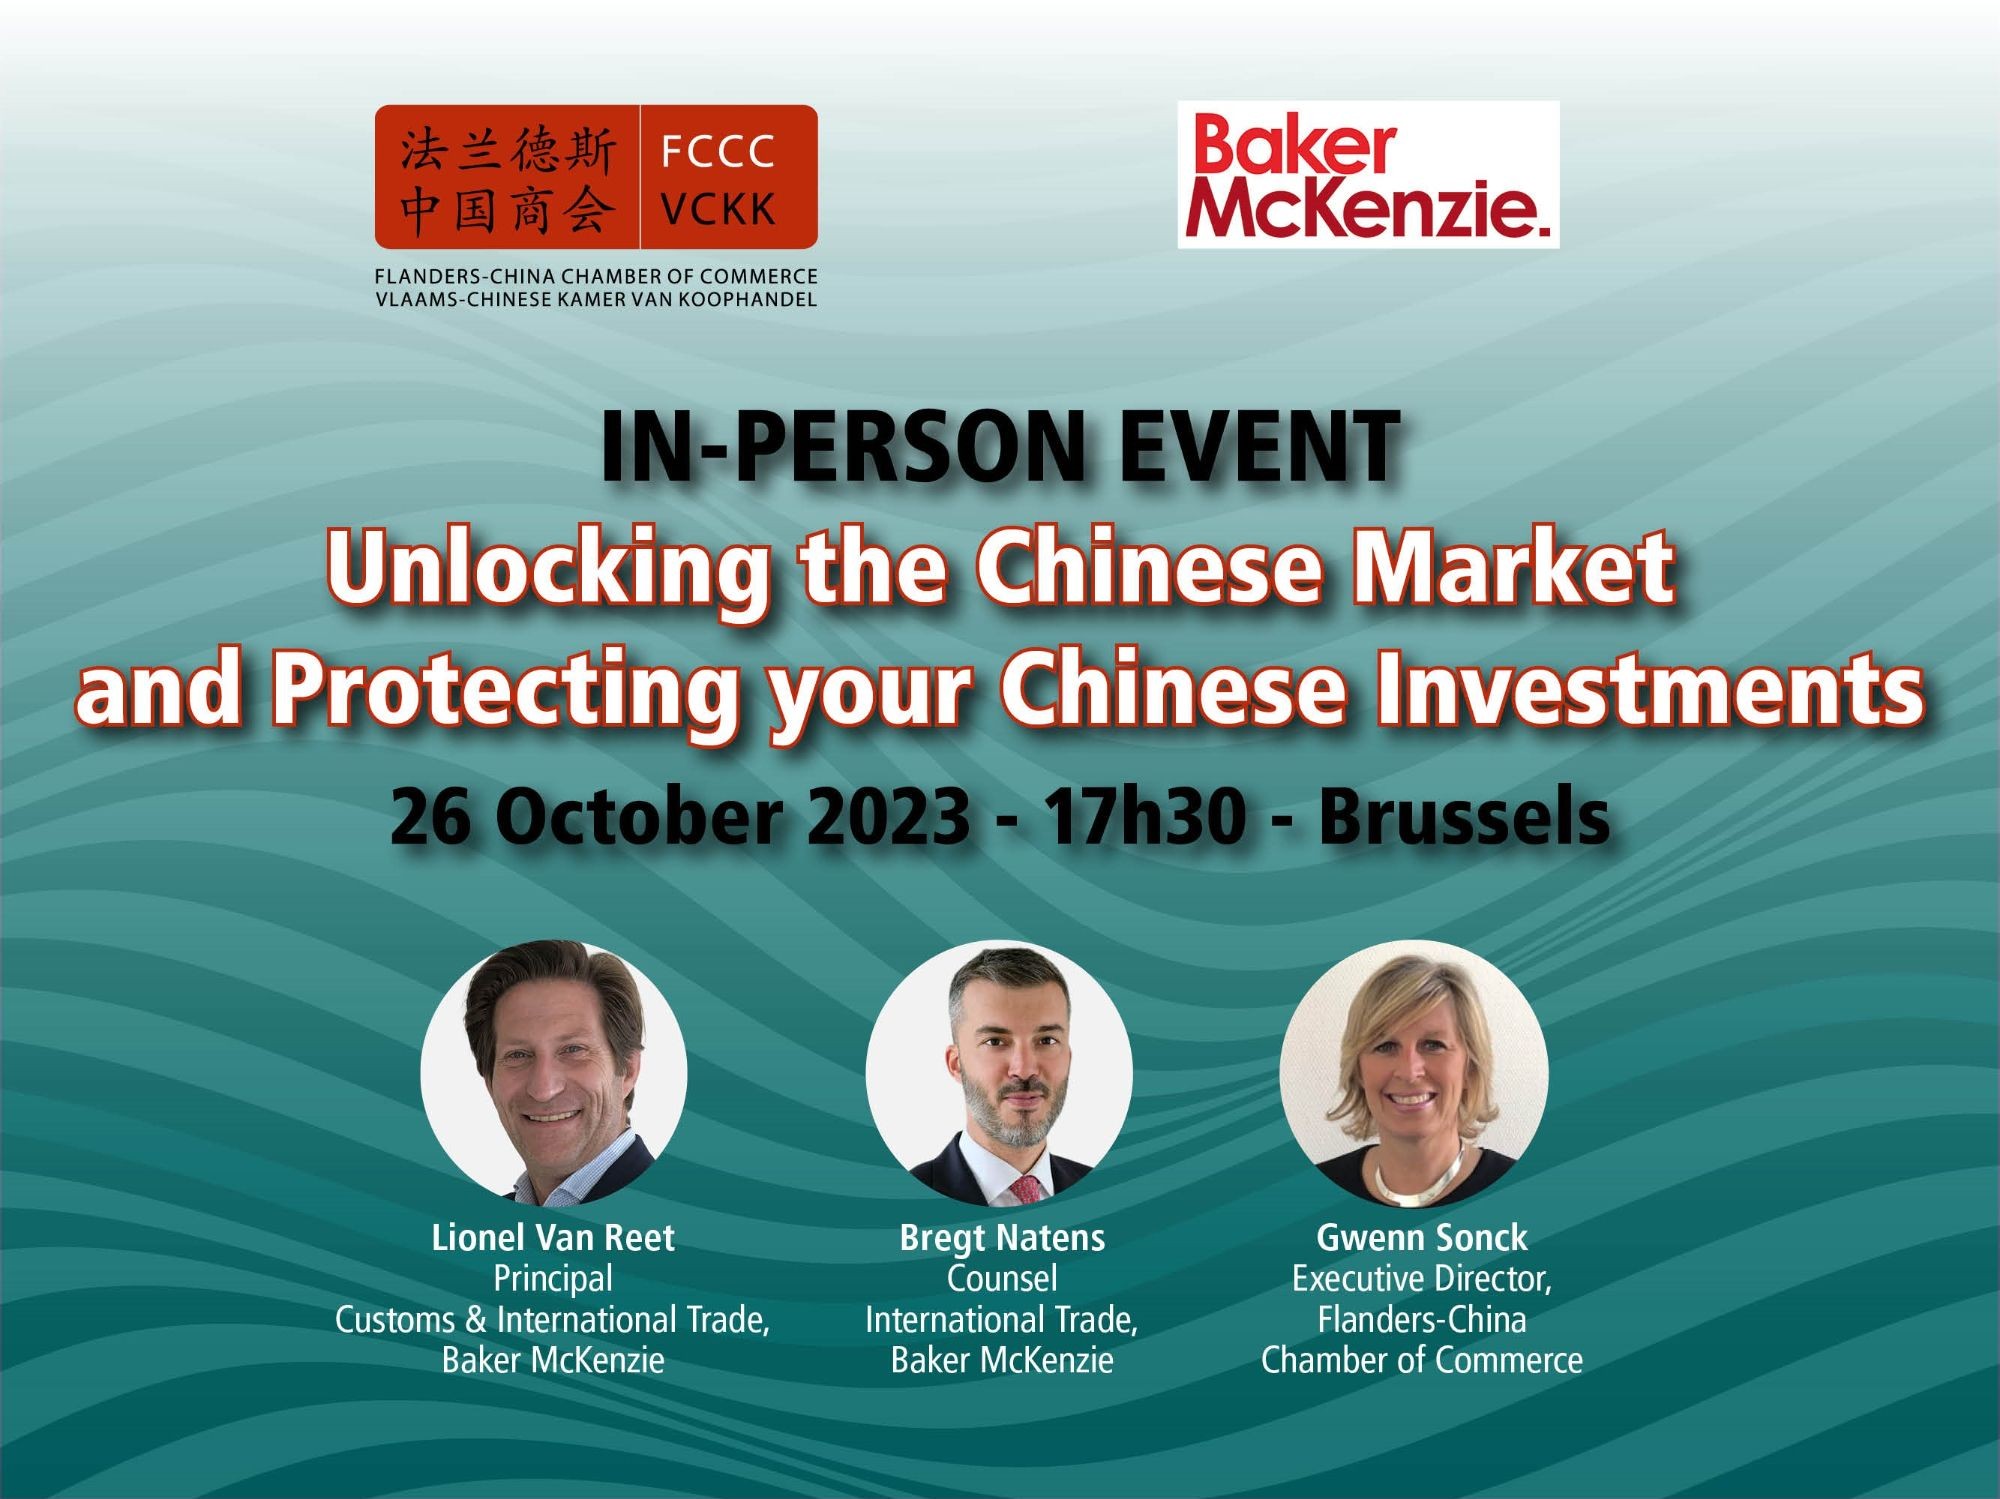 In-person event: Unlocking the Chinese Market and Protecting your Chinese Investments - 26 October 2023 - 17h30 - Brussels